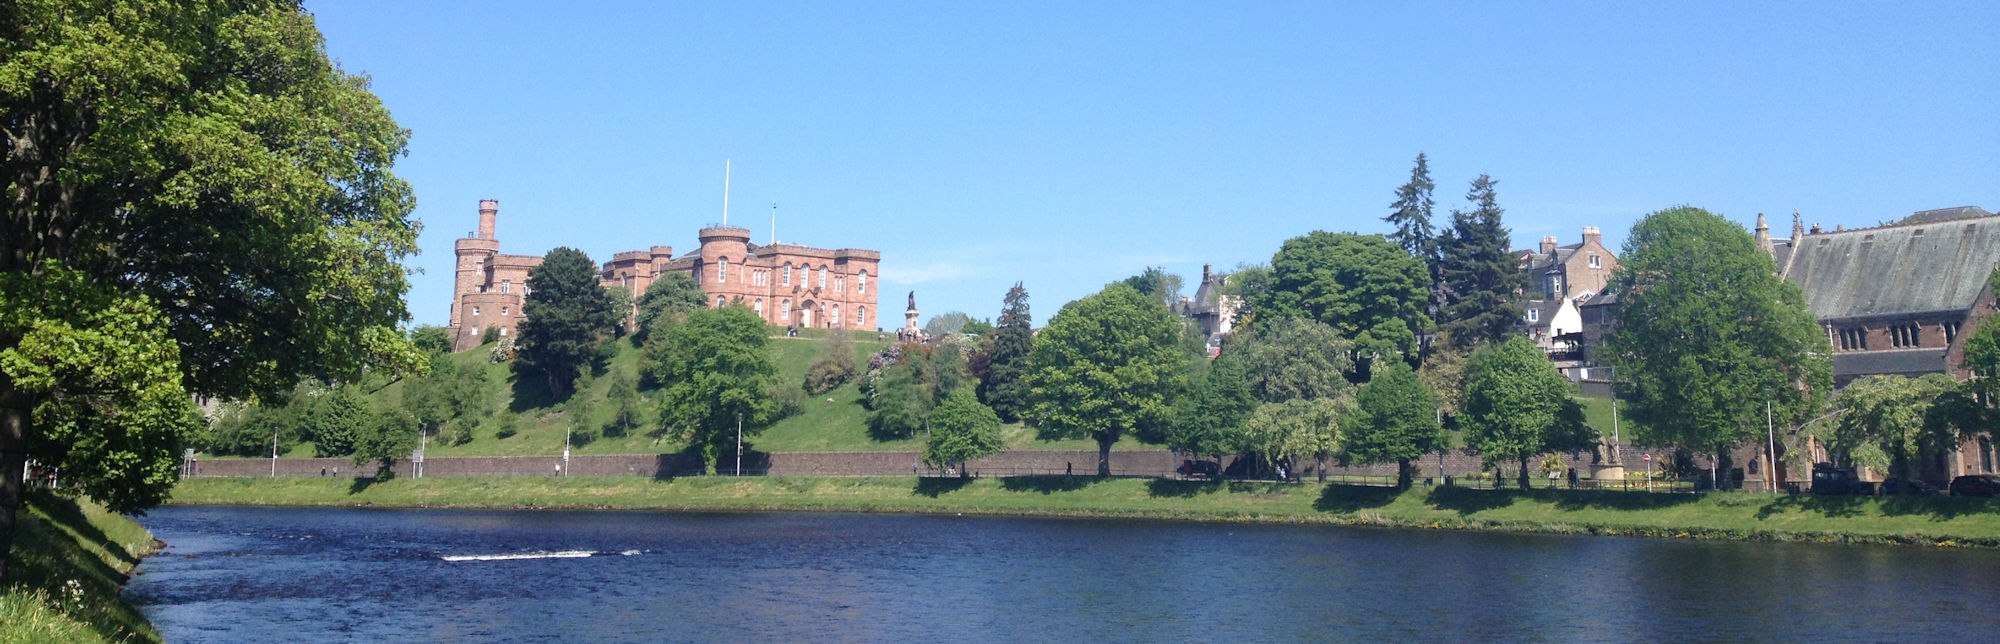 Inverness Castle in summer